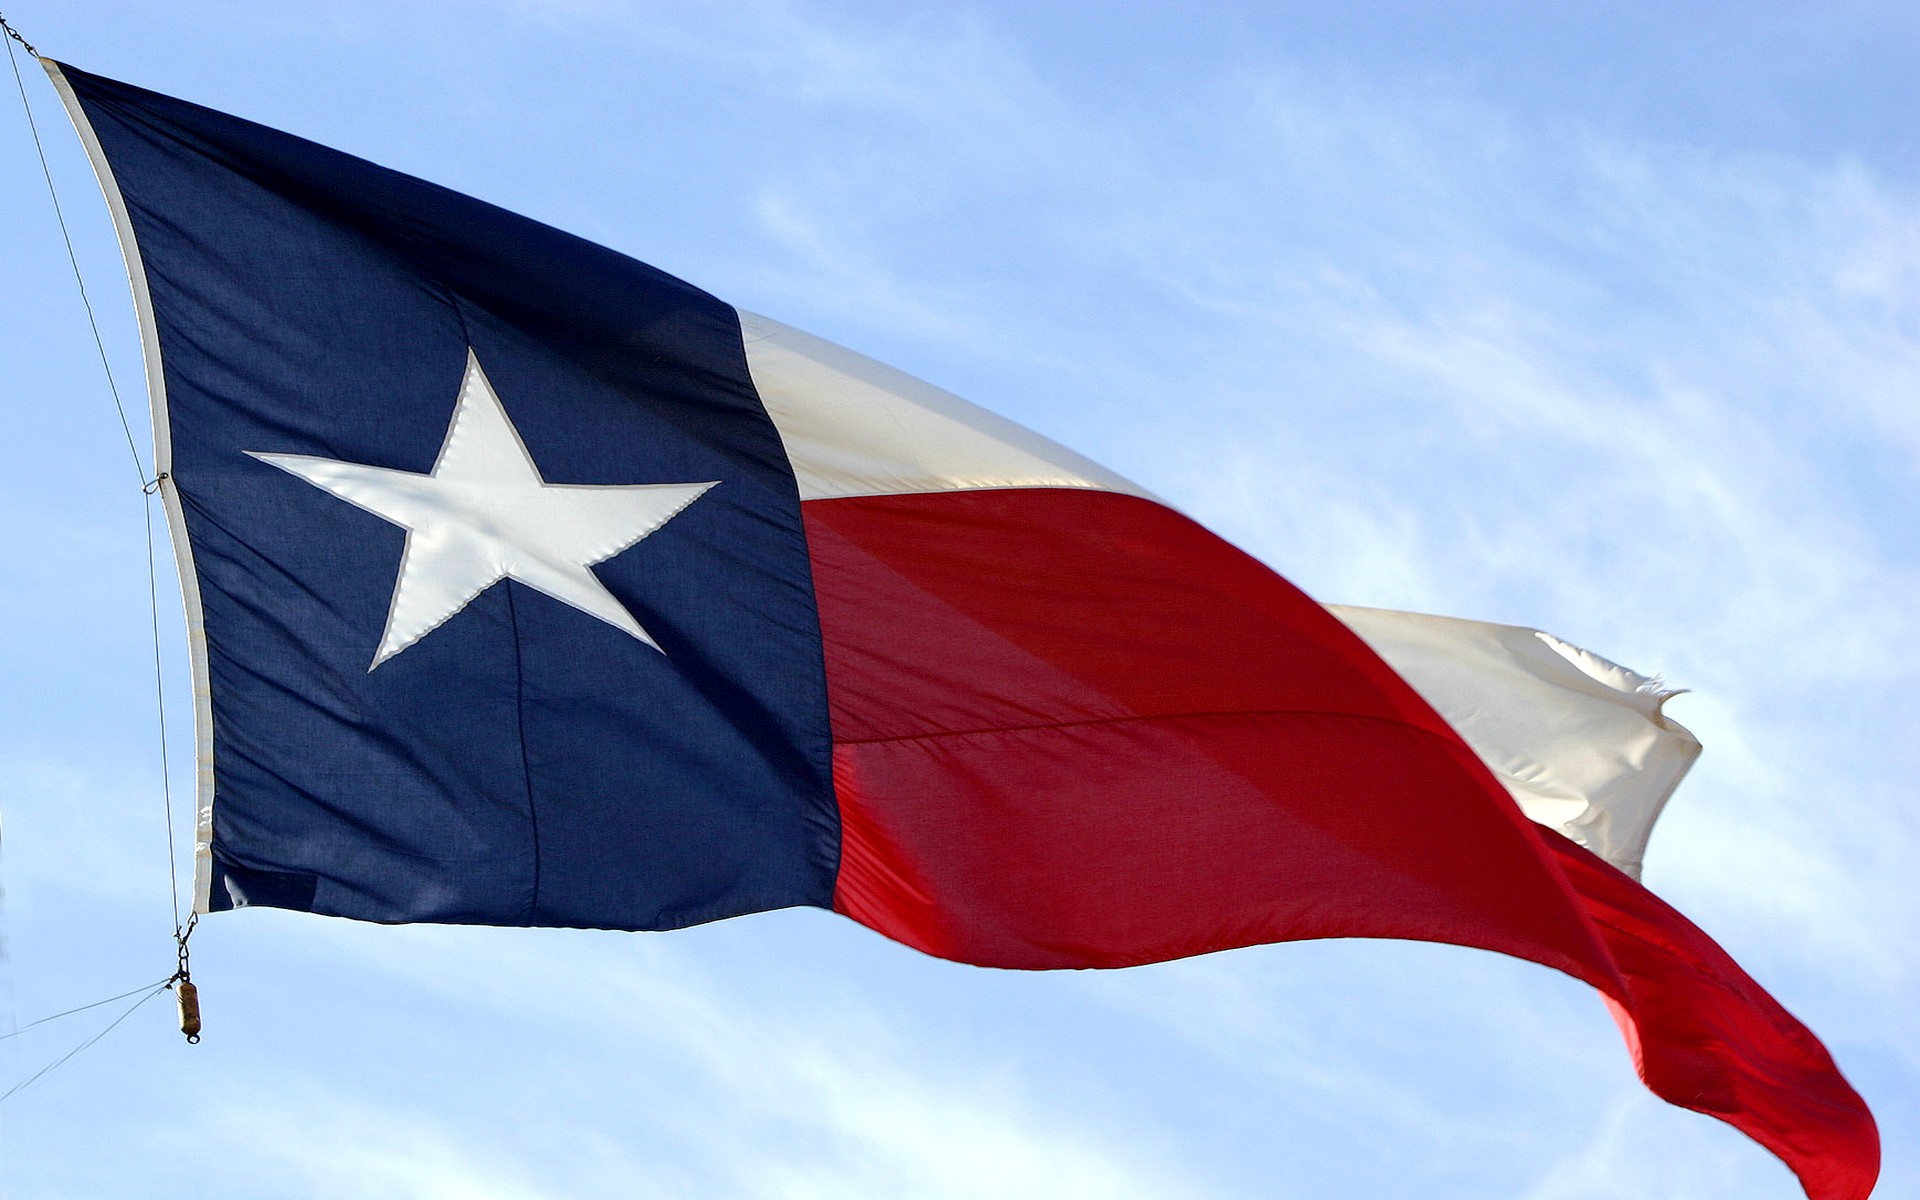 Texas Flag wallpaper ·① Download free cool HD wallpapers 